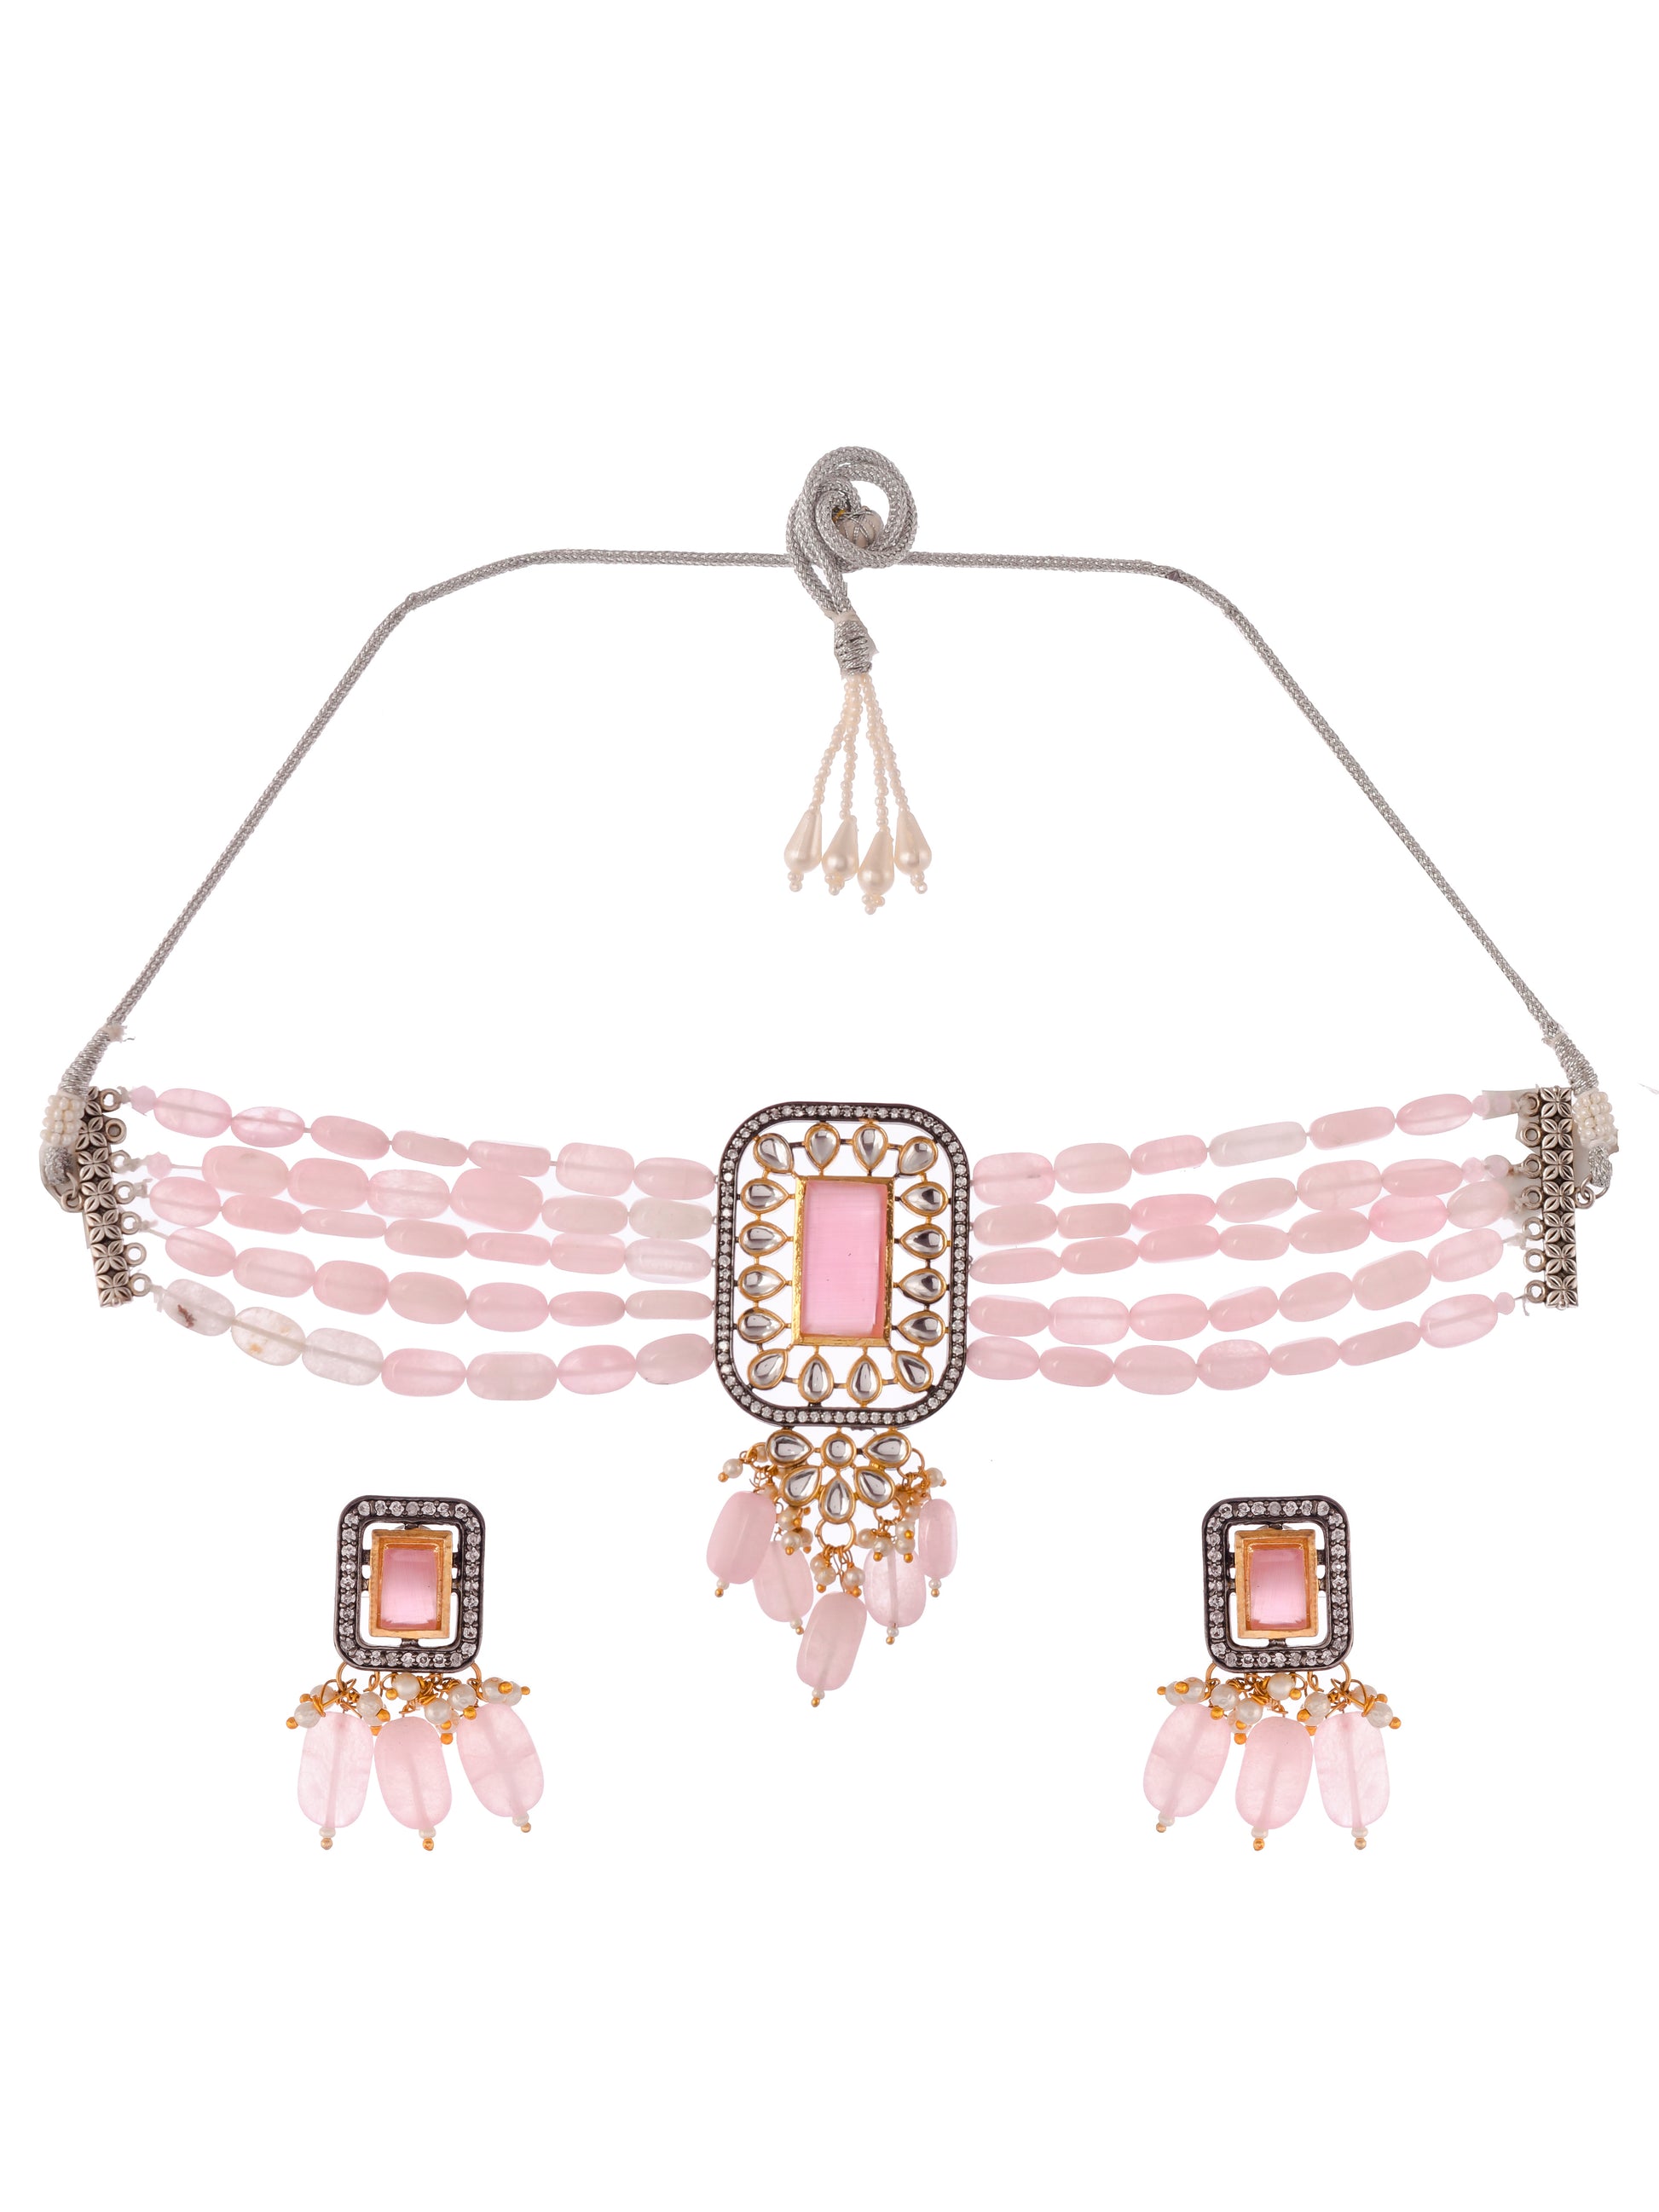 Shop This stunning handcrafted pink beaded kundan Choker jewellery set is the perfect addition to any woman or girl's collection. Made with intricate detail and high-quality materials, this set exudes elegance and sophistication.